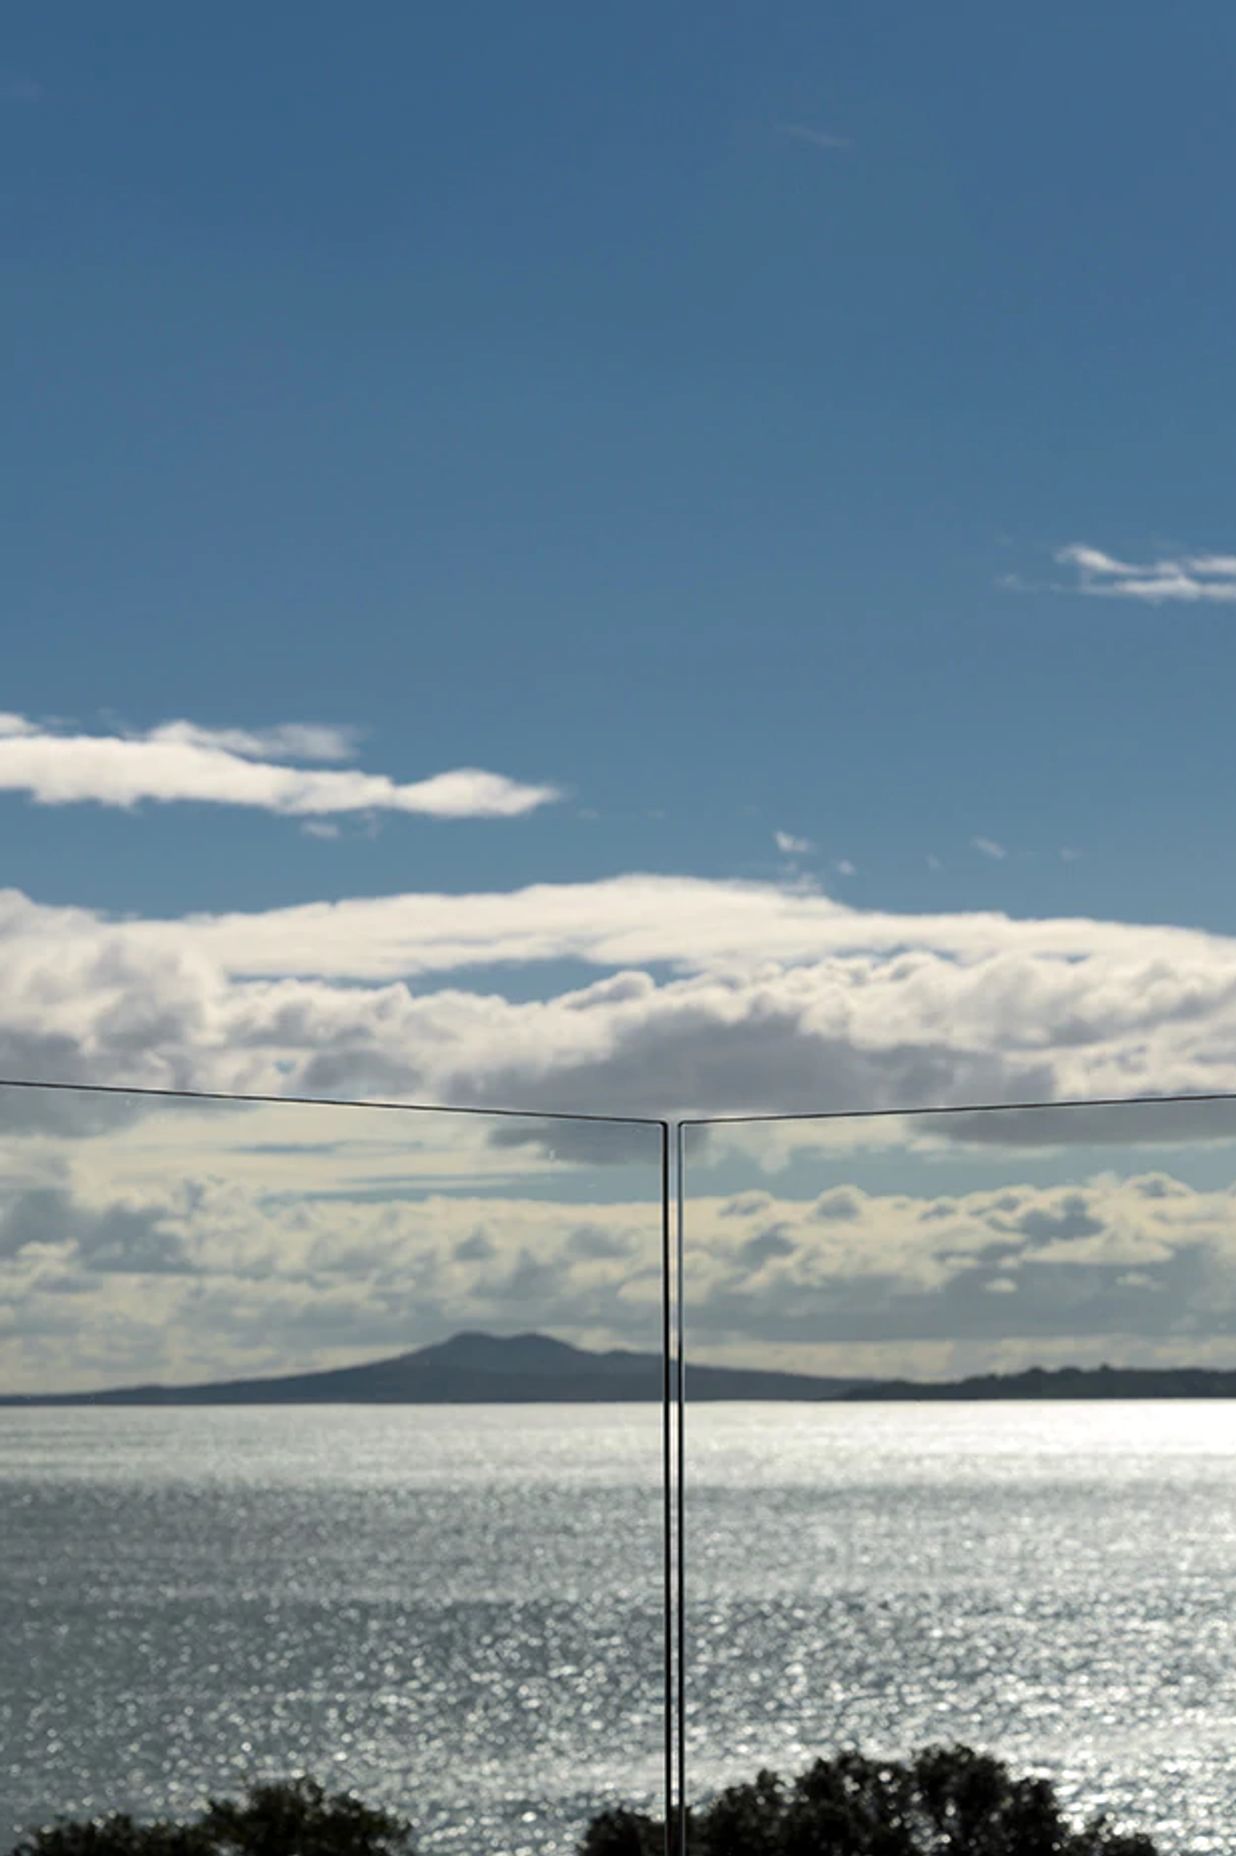 Let glass balustrades work their magic by keeping them free of anything that might obscure the view.